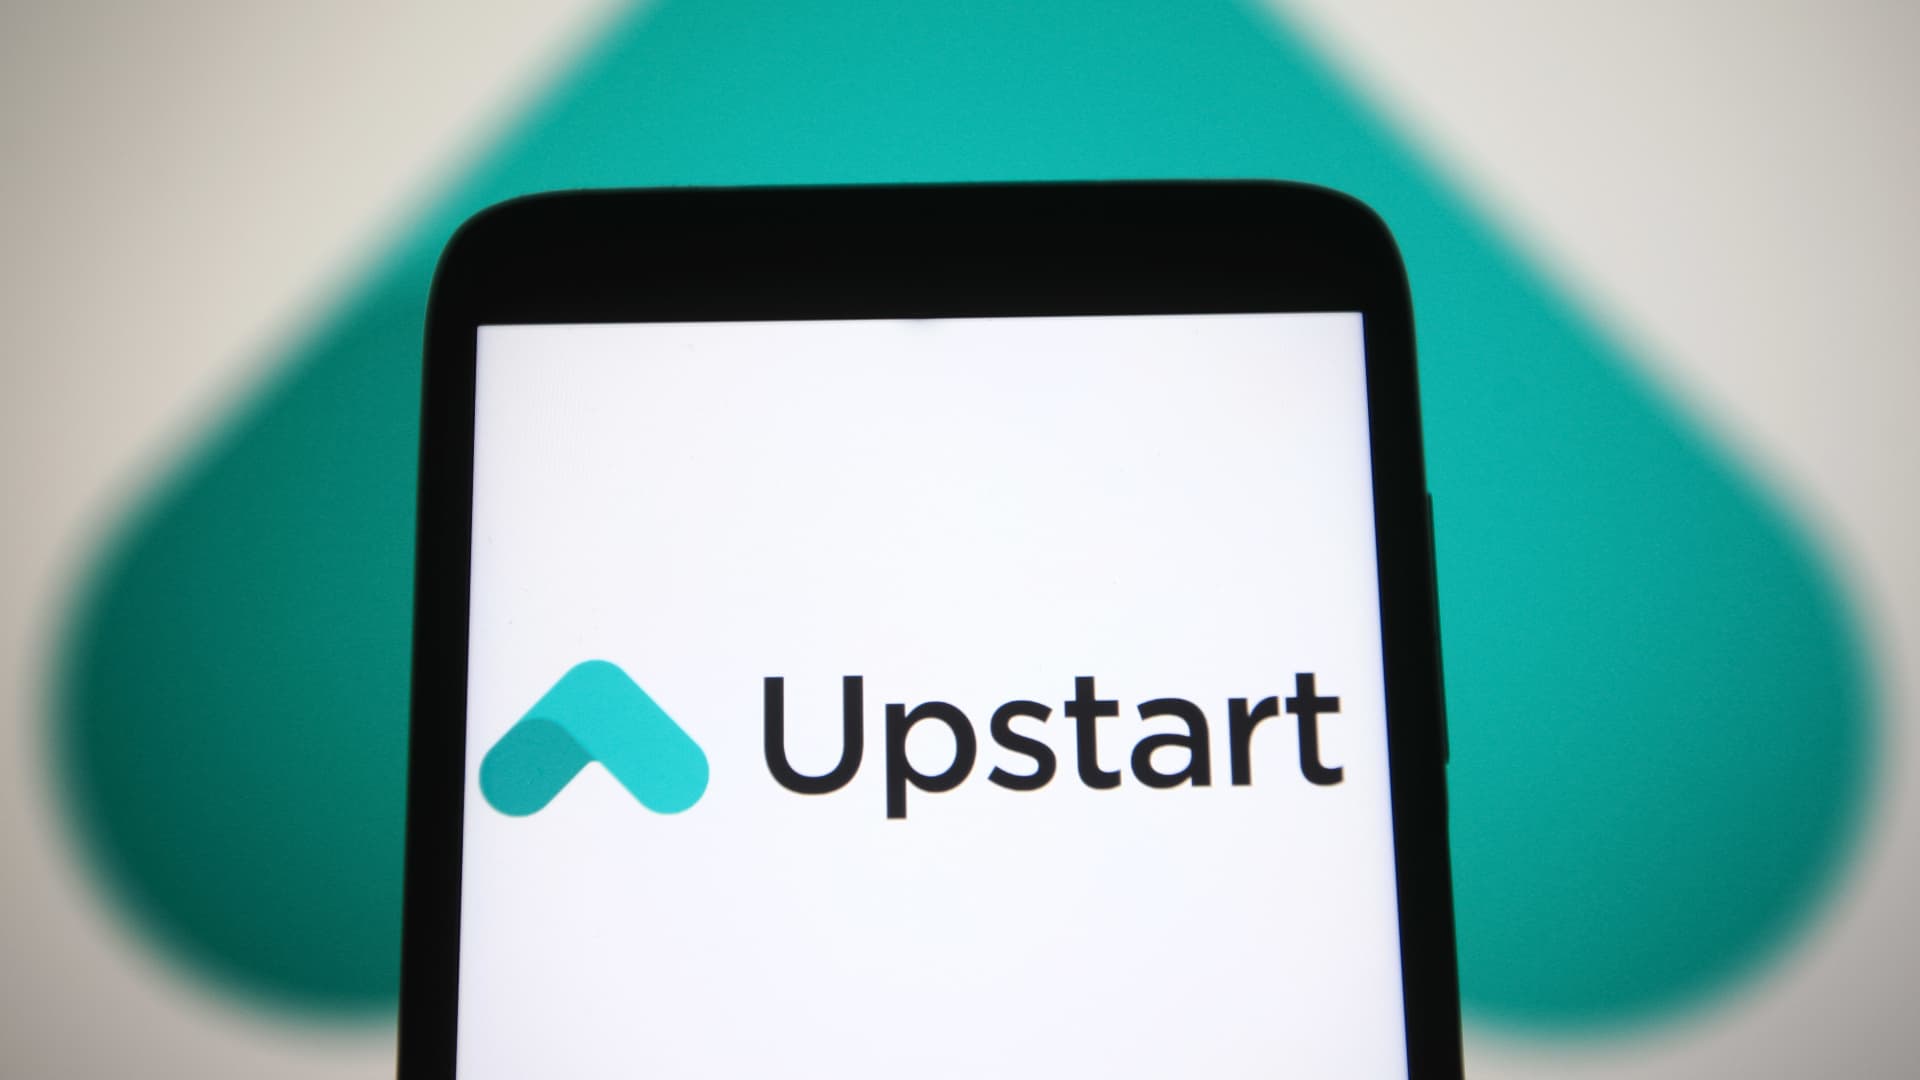 Upstart shares plummet 56{7a5fcad74e69fd0a1026100c5038d51c4a14812d5f844112640eb667c4d02bd8} after company cuts full-year revenue forecast